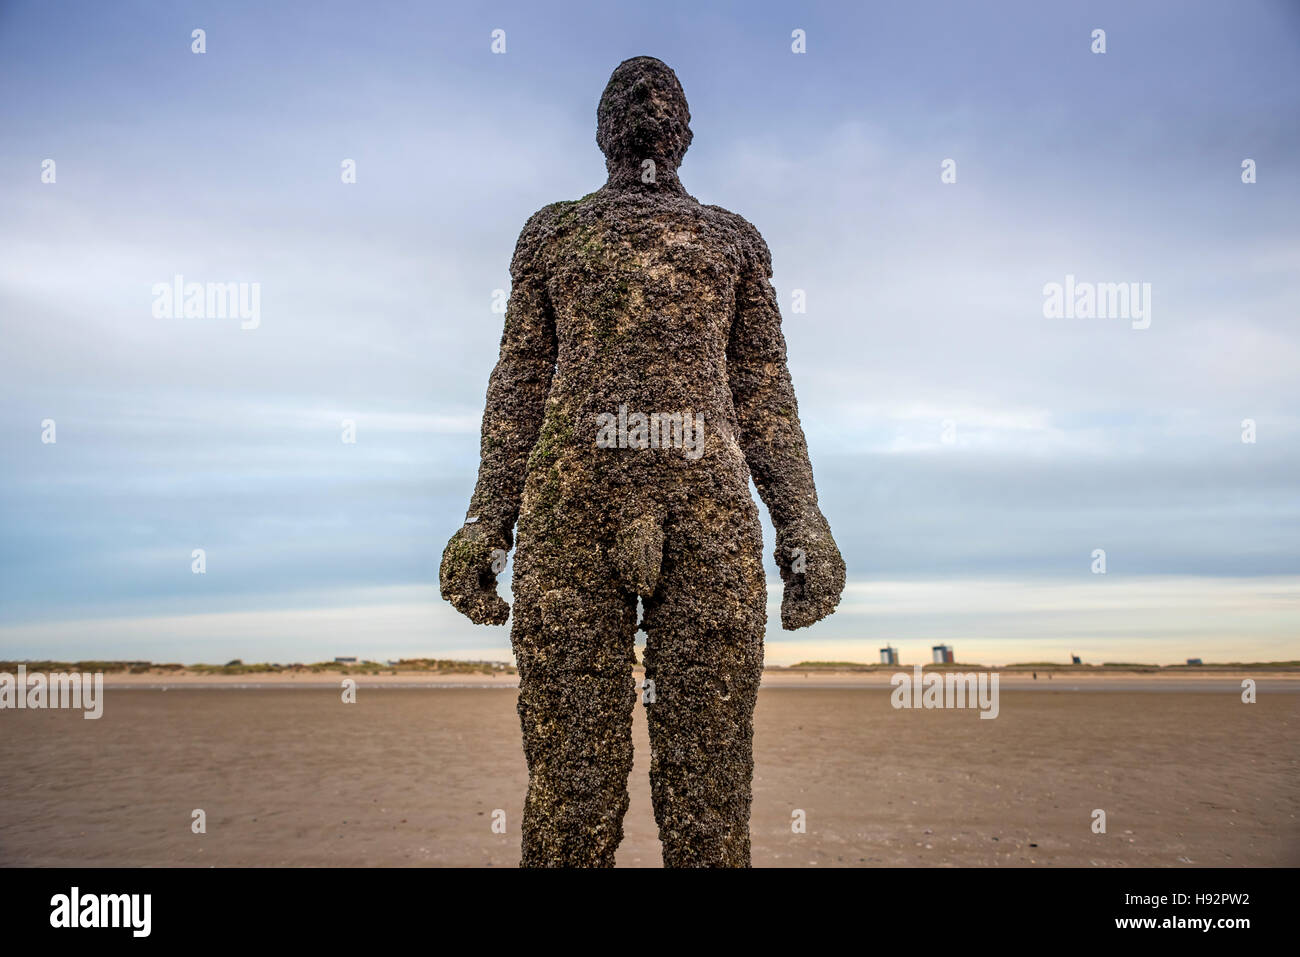 Anthony Gormley's art installation 'Another Place' at Crosby beach in Liverpool. Stock Photo